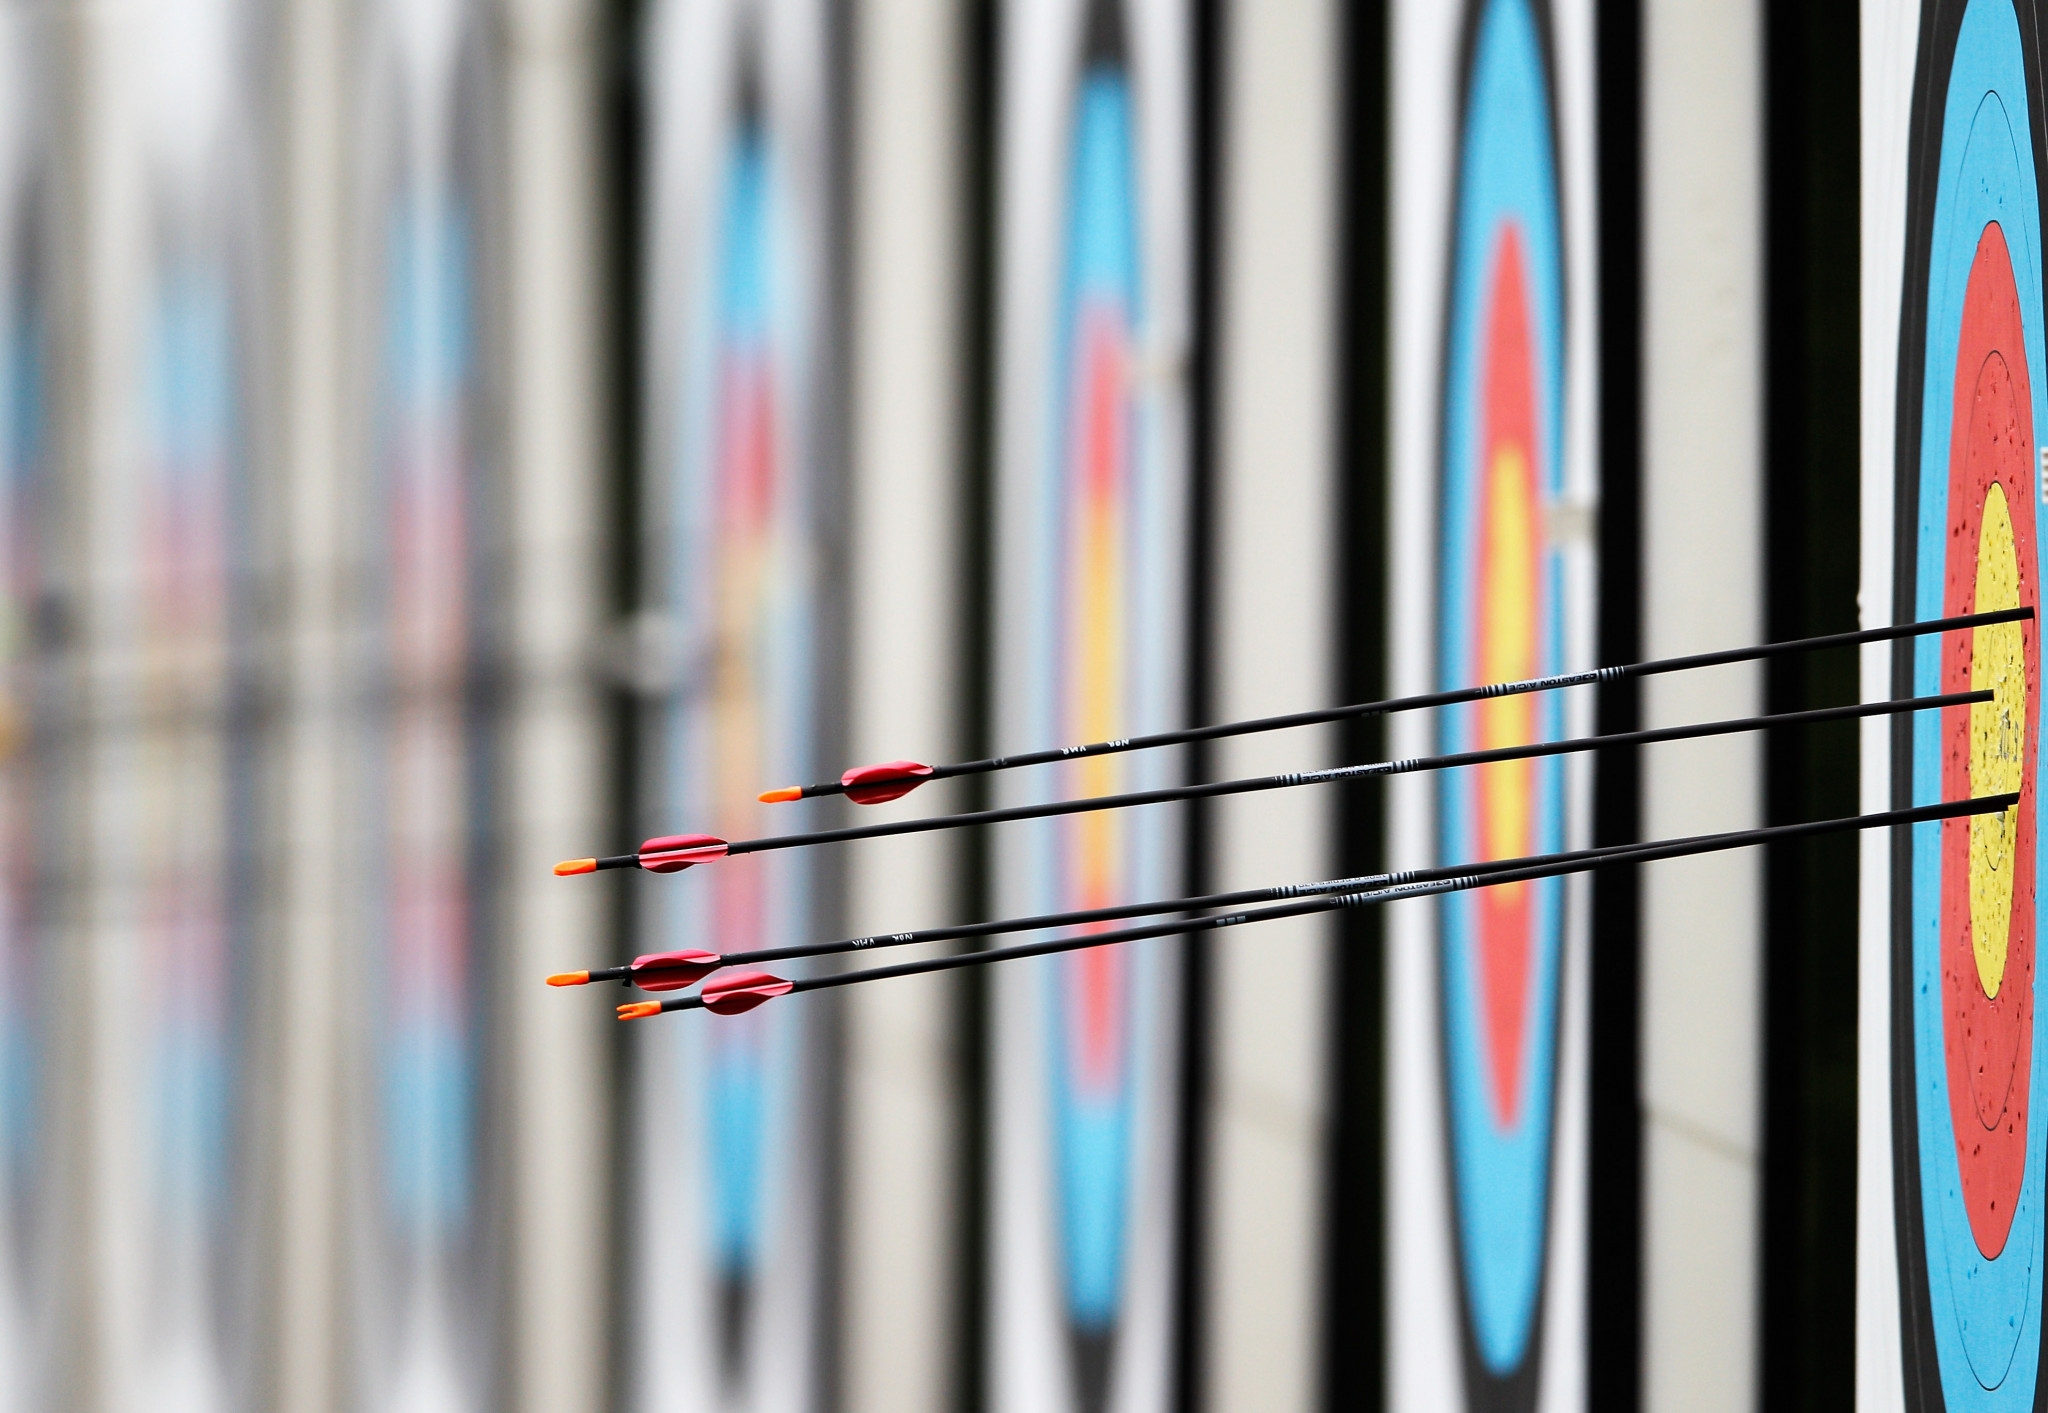 Compound team finals confirmed for Archery World Cup in Medellín